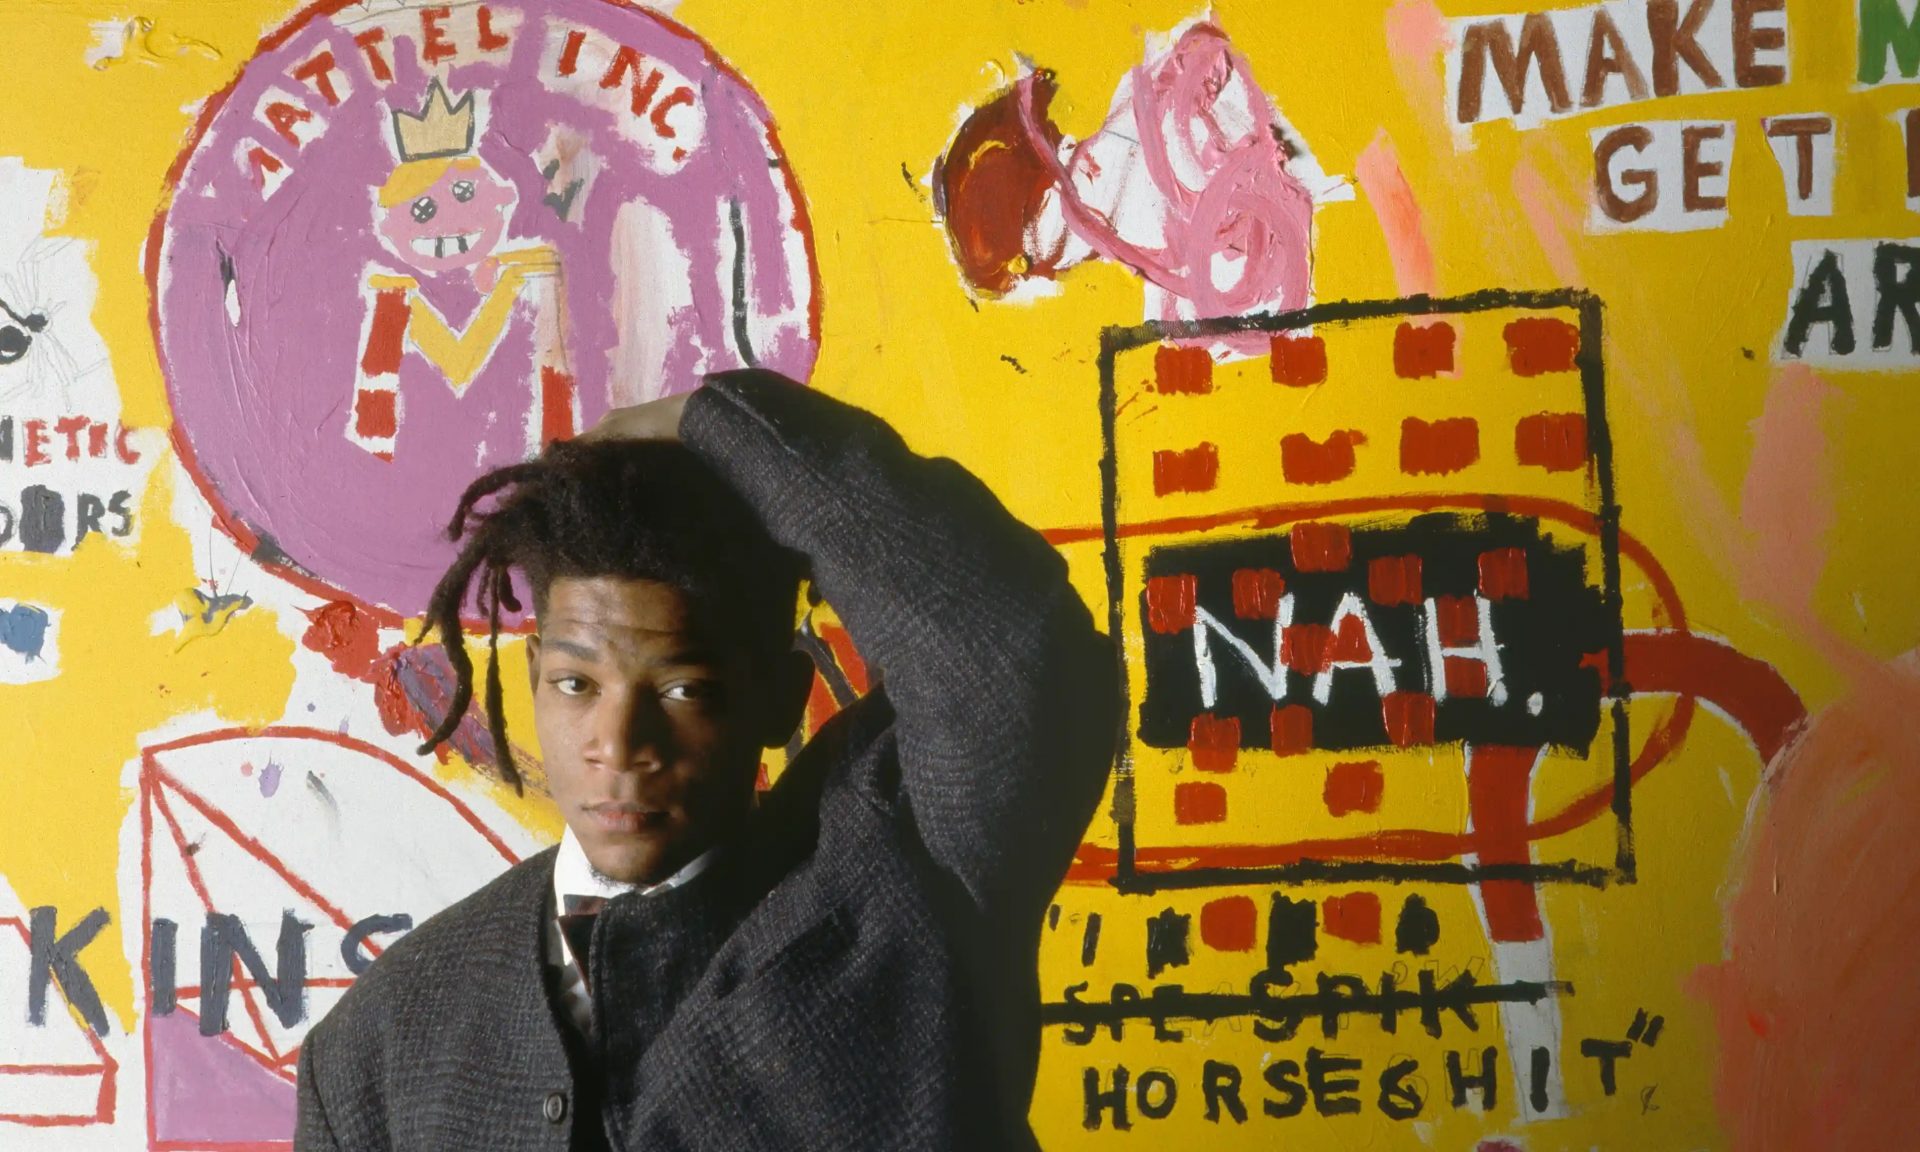 A photo showing artist Jean-Michel Basquiat standing in front of his vibrant artwork filled with bold strokes of yellow, red, black, and pink colors.